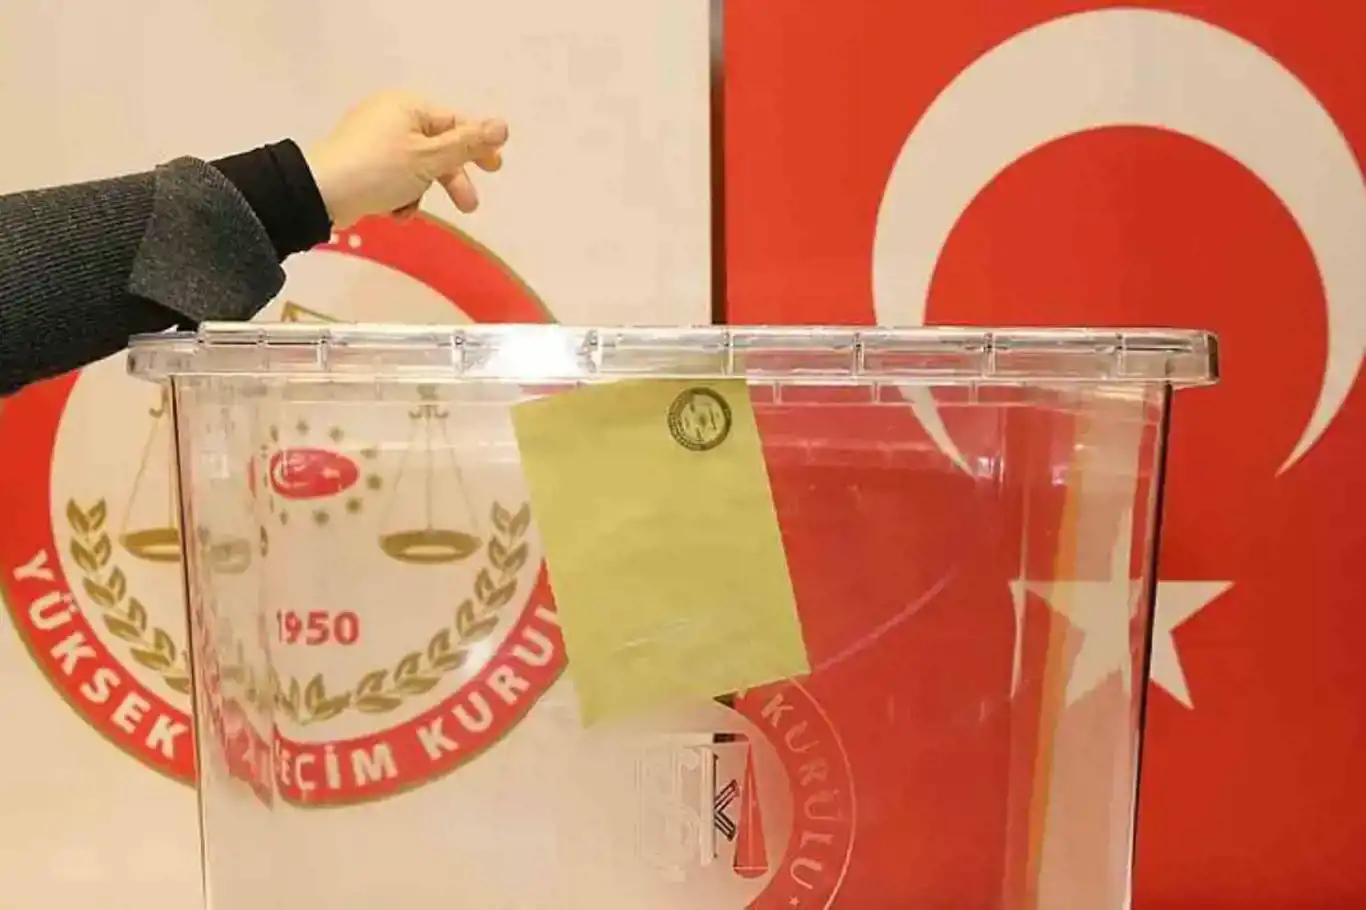 Türkiye to hold presidential and parliamentary elections on Sunday